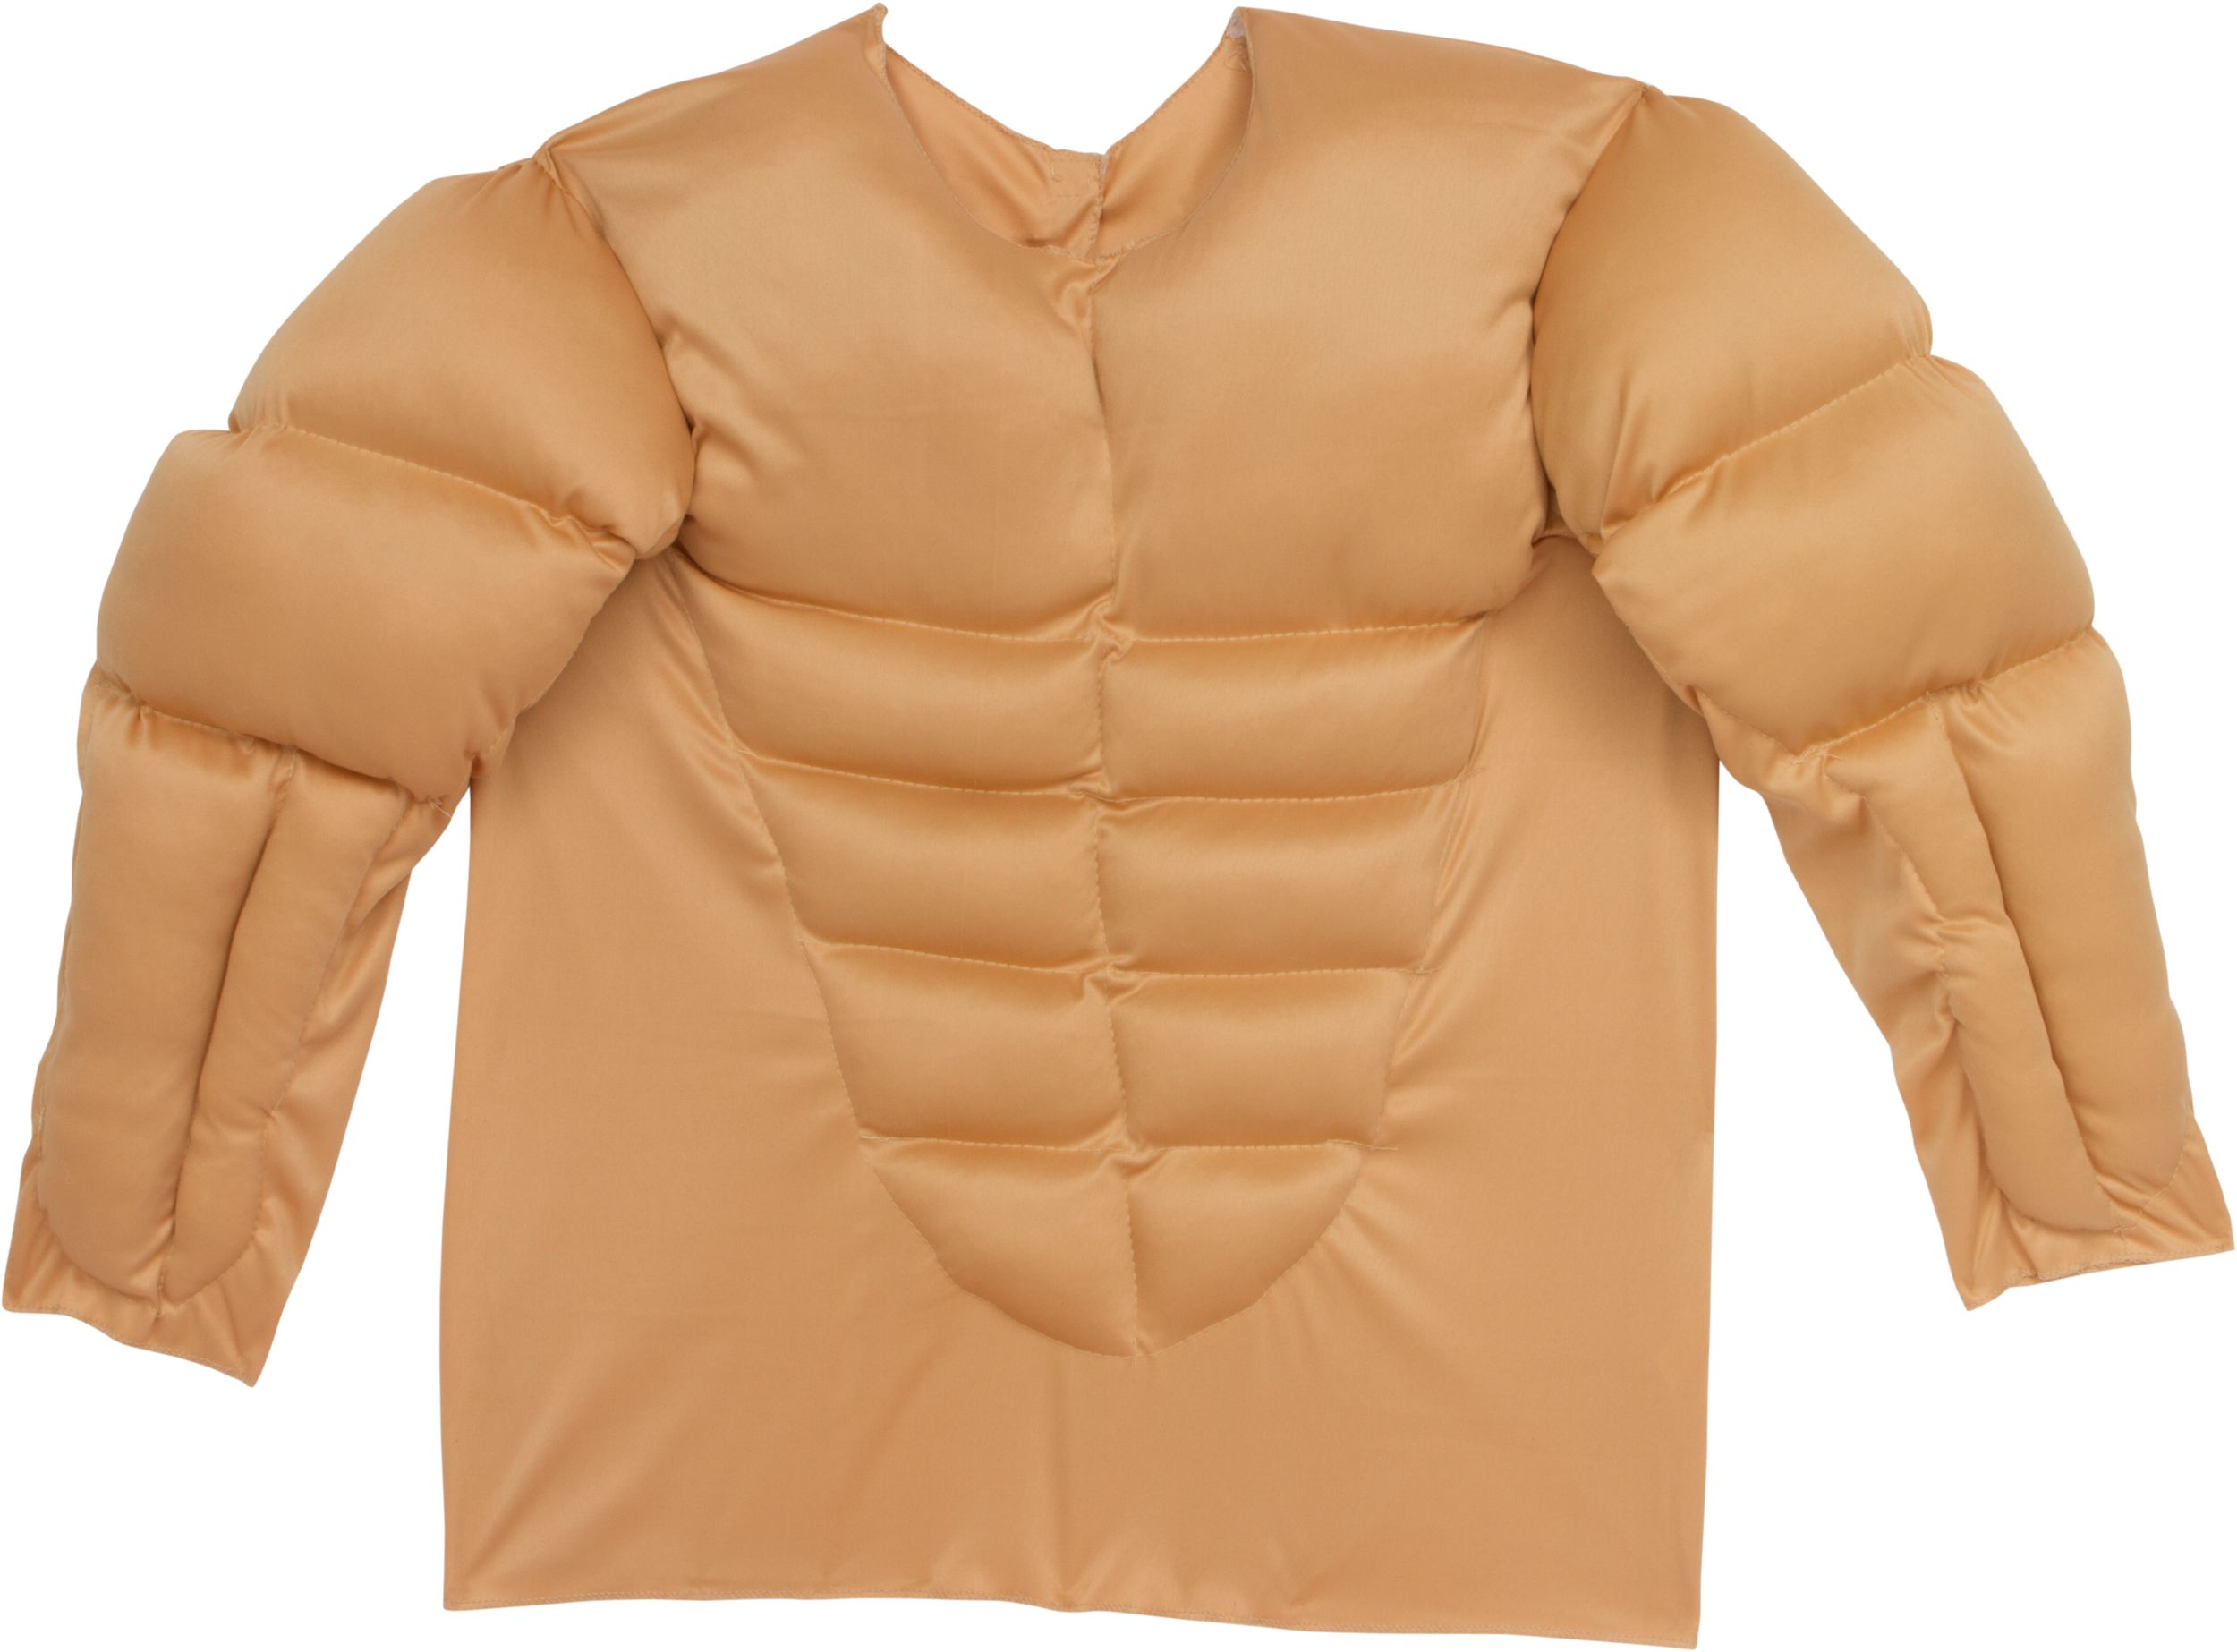 Adult Padded Muscle Shirt 